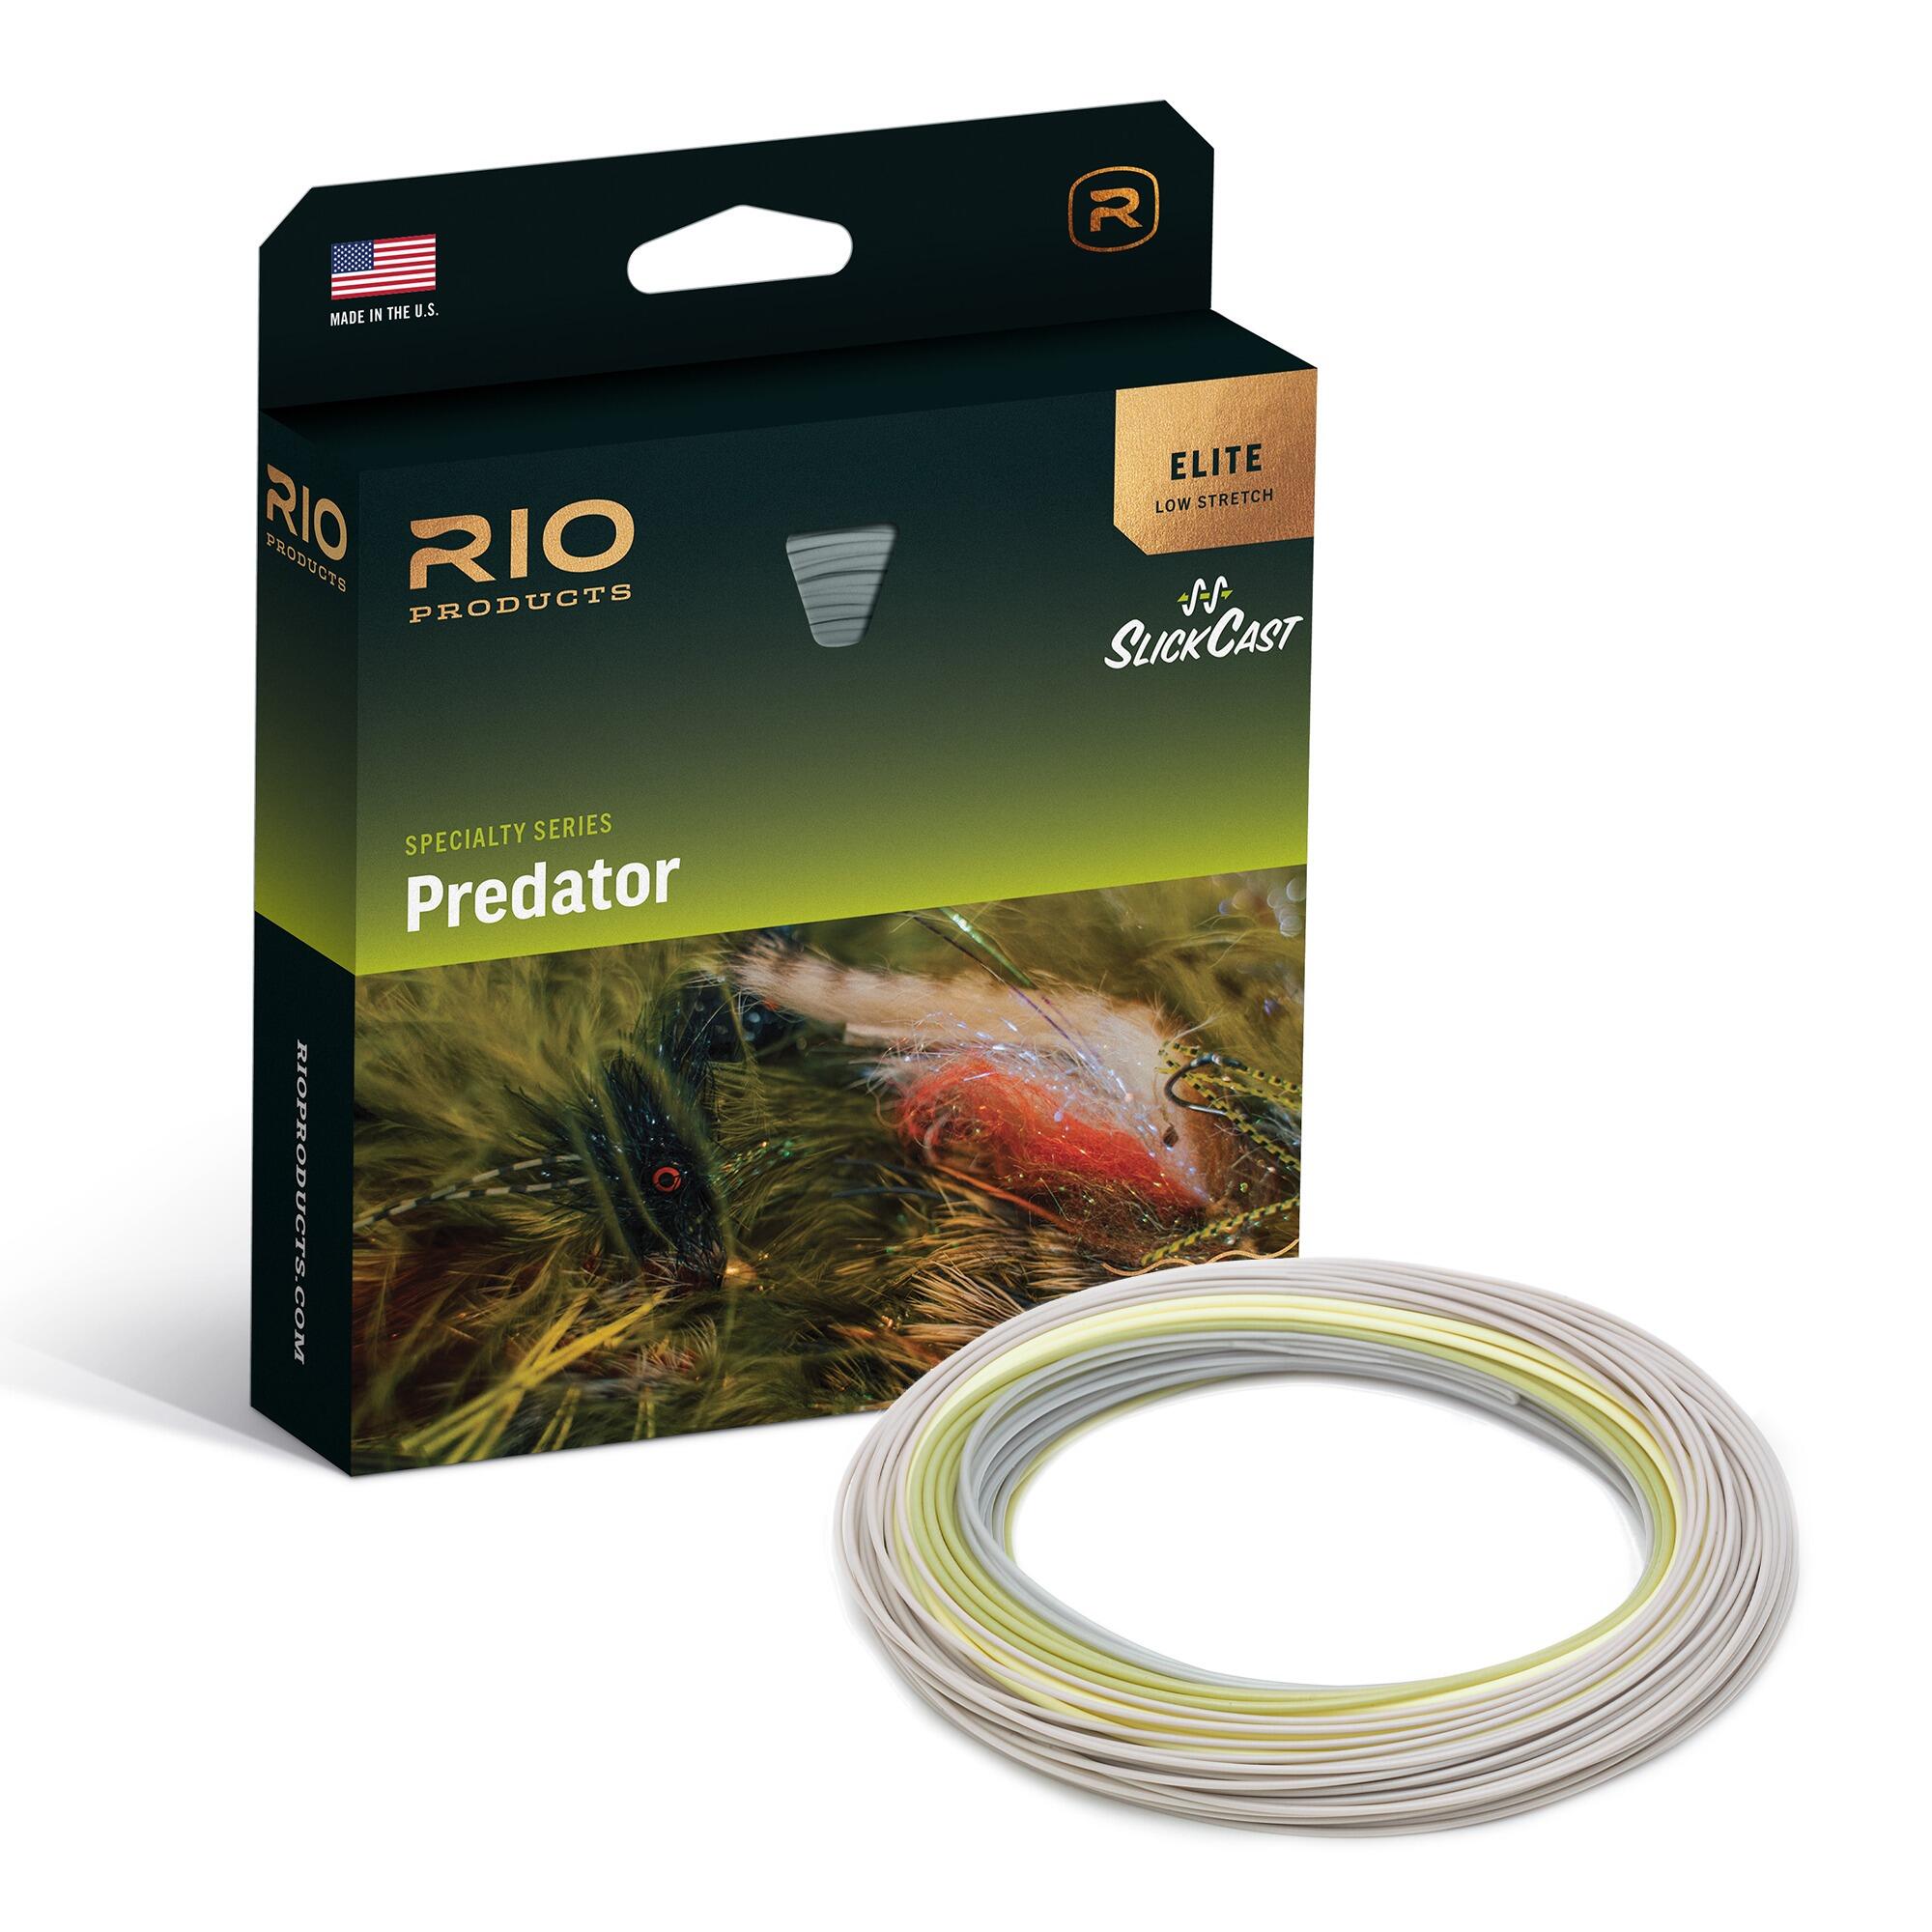 Fly Lines on Offer